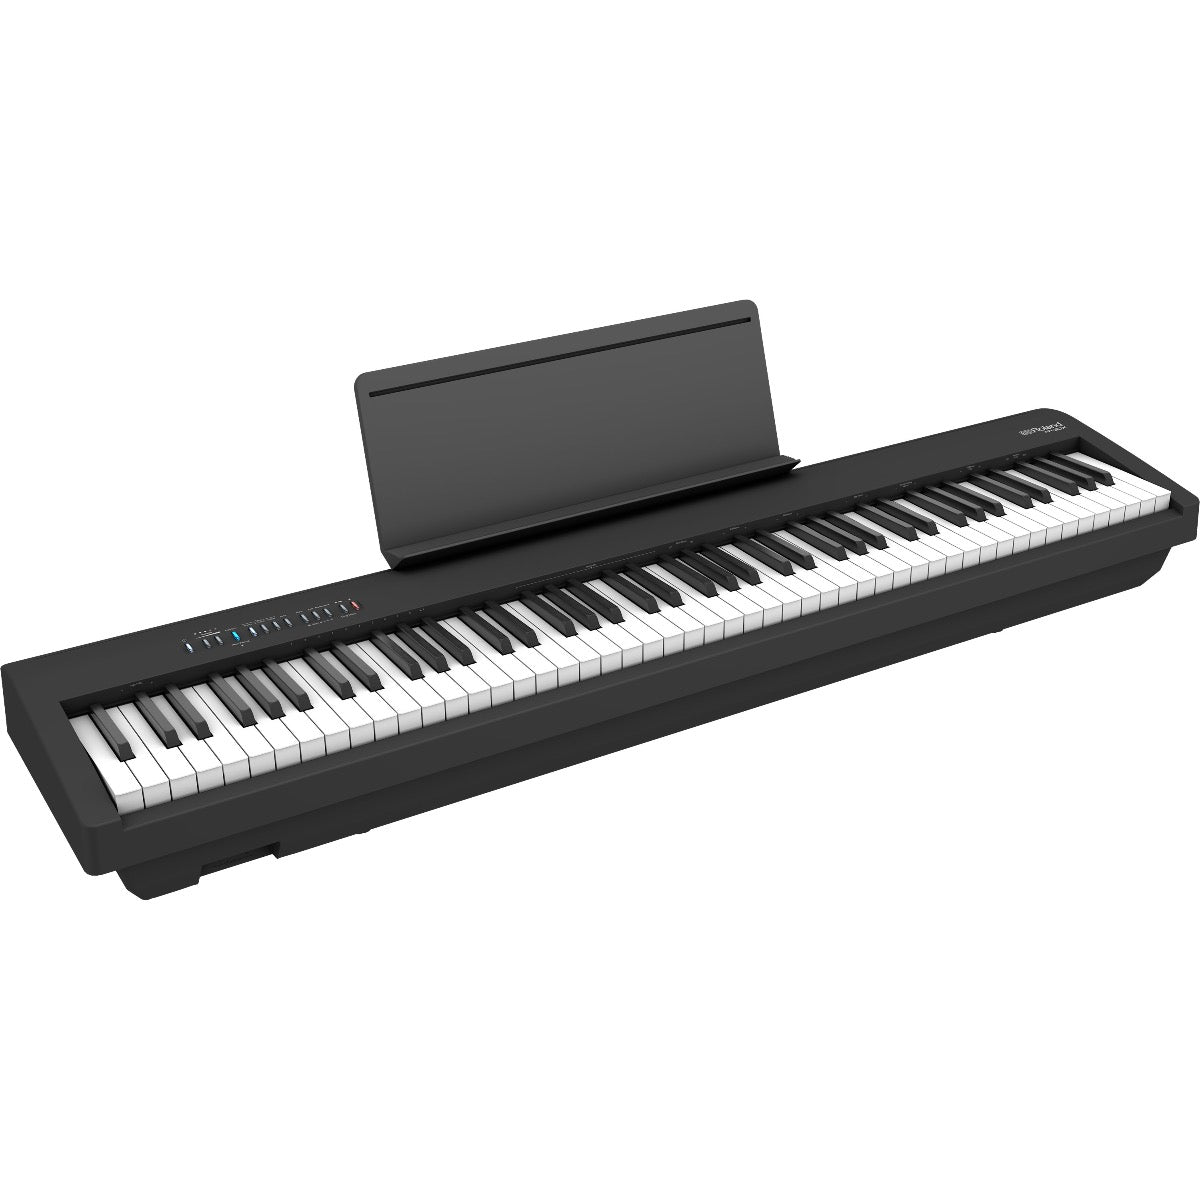 3/4 view of Roland FP-30X Digital Piano - Black with music rest installed showing top, front and left side